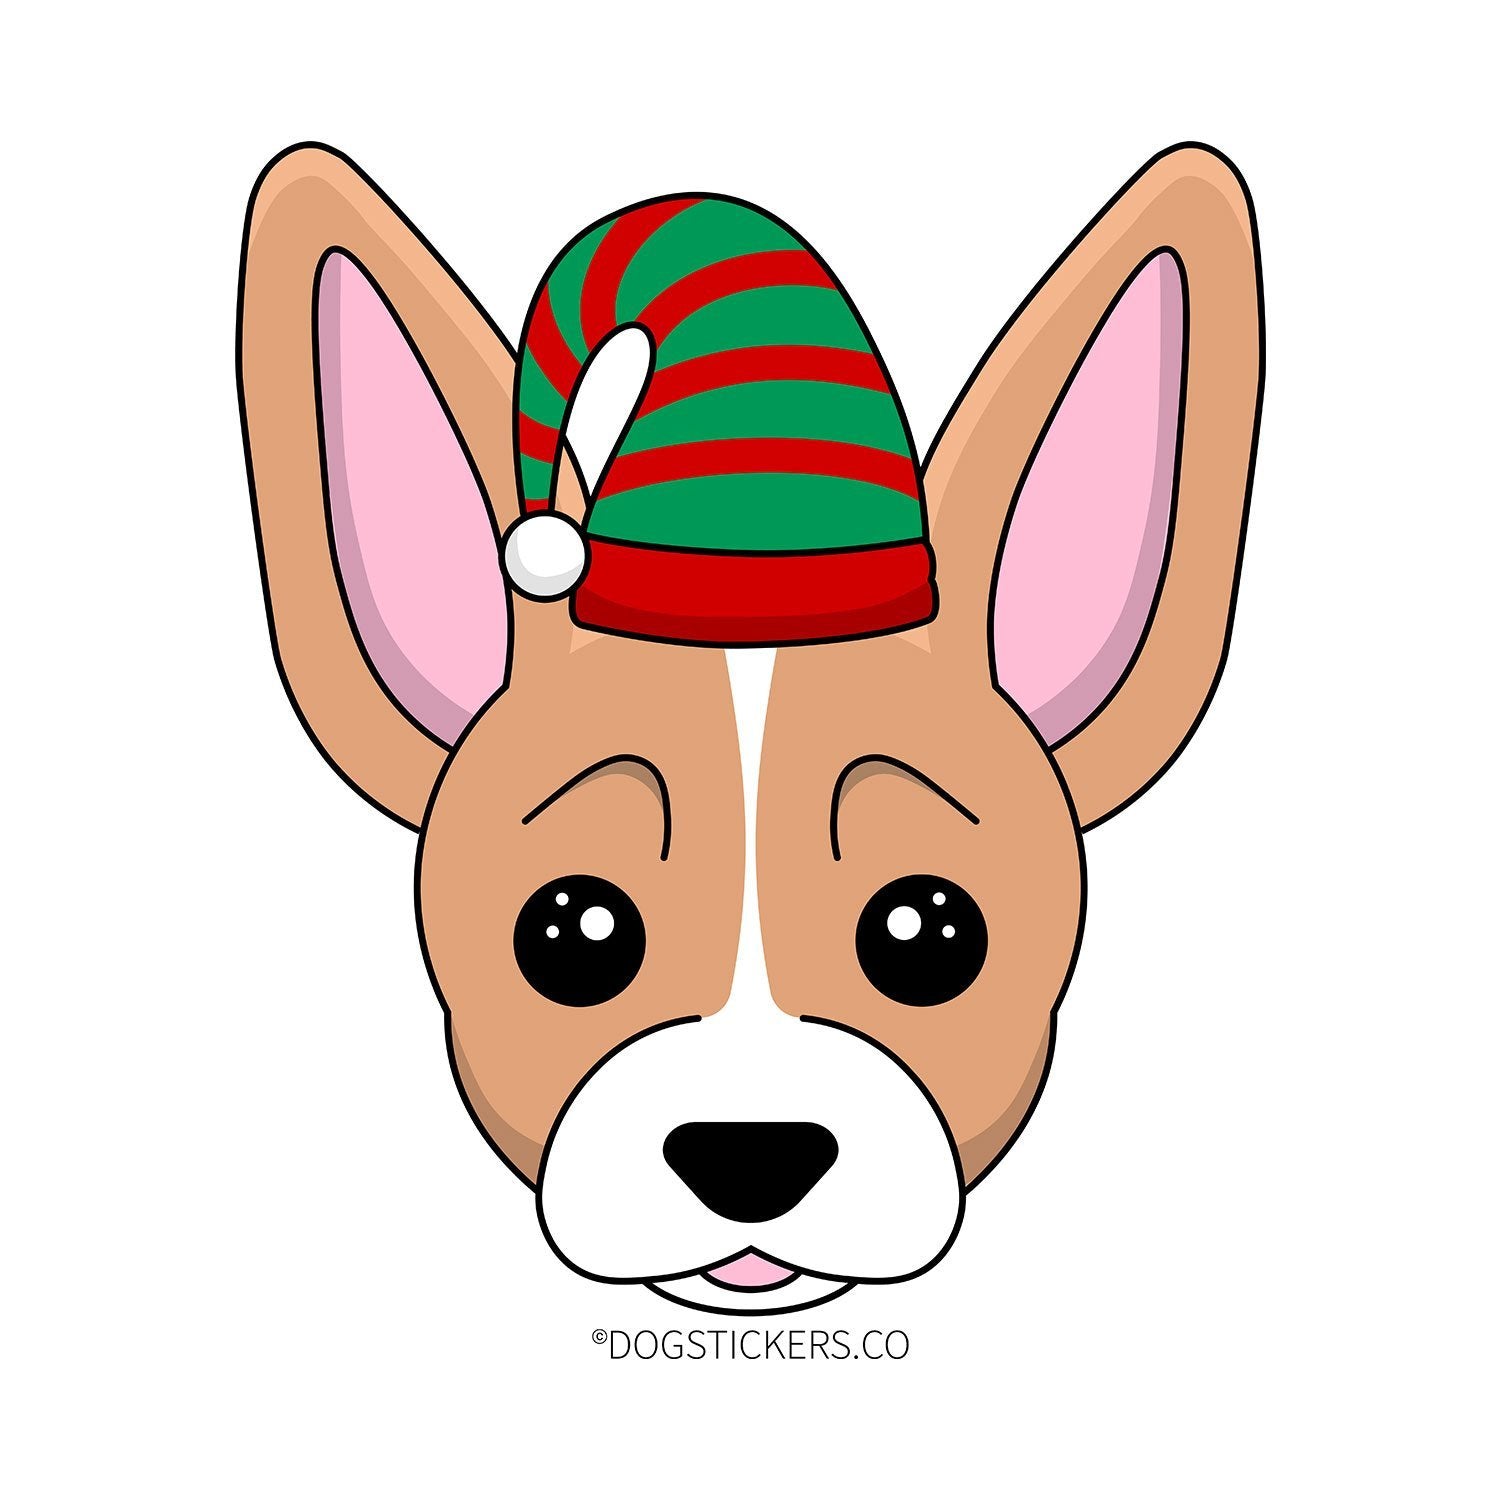 Chihuahua Sticker - Christmas Elf - Dogstickers.co